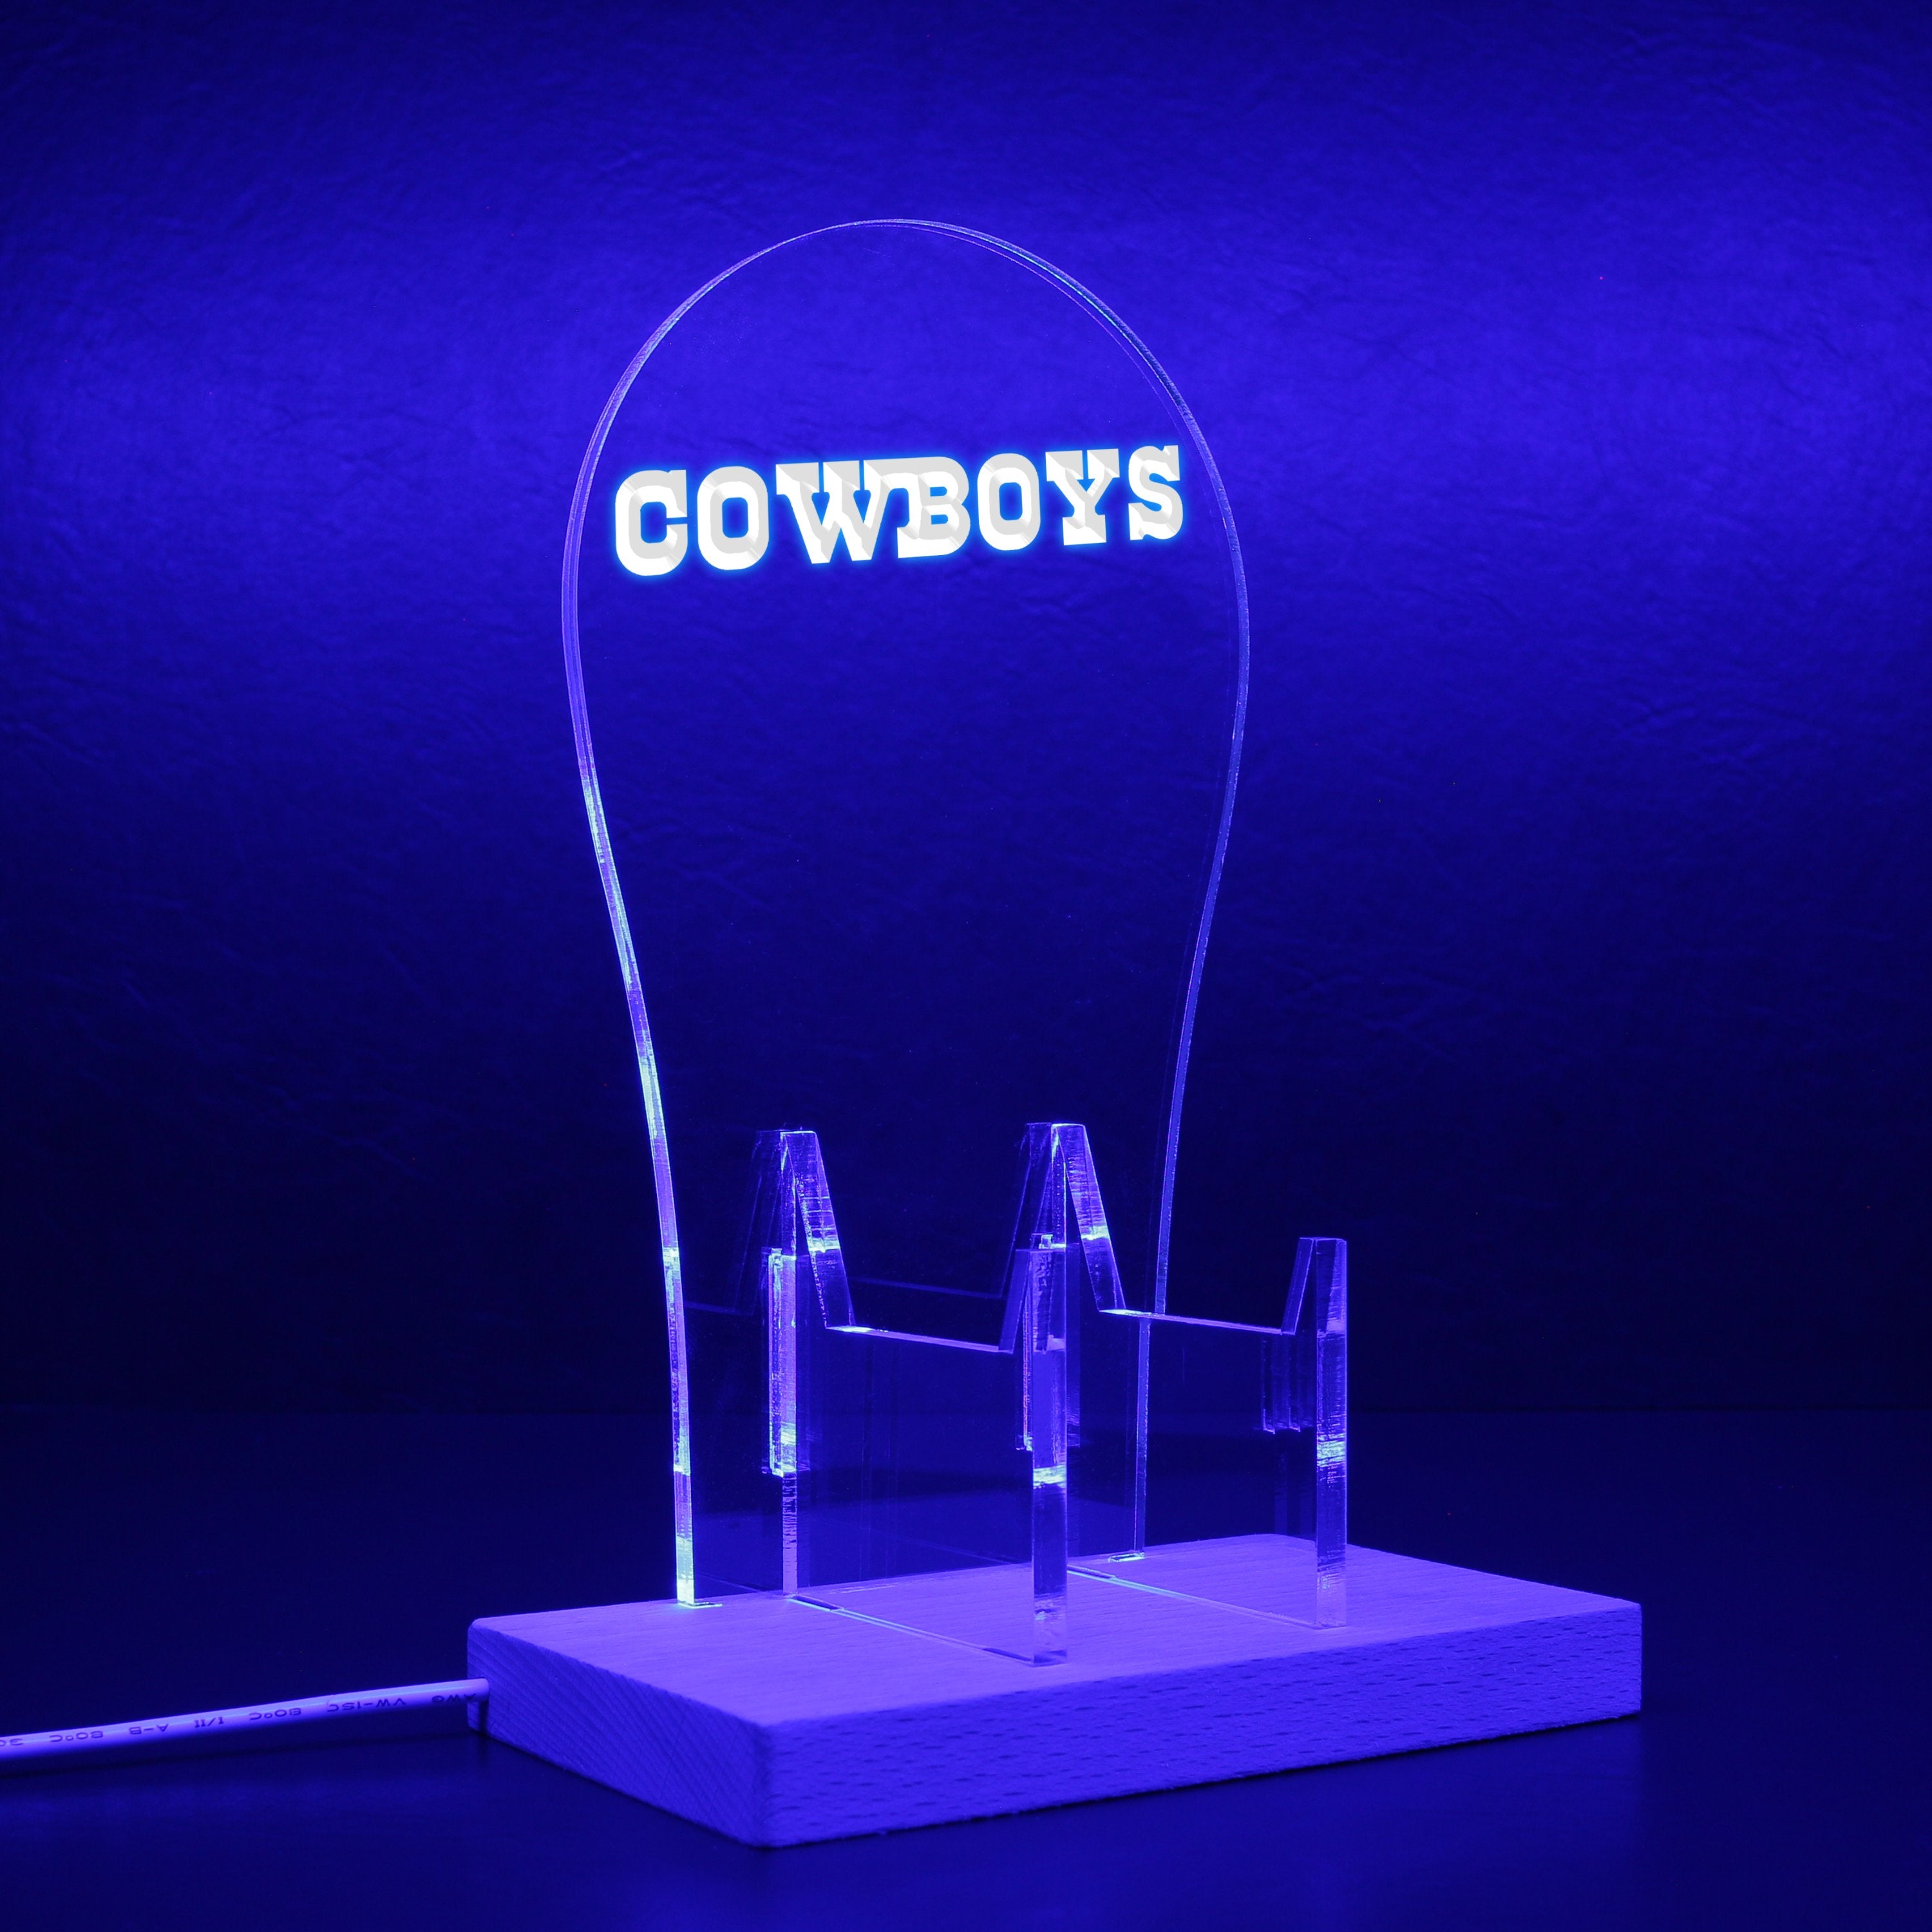 Dallas Cowboys script logo in use since 1960 RGB LED Gaming Headset Controller Stand